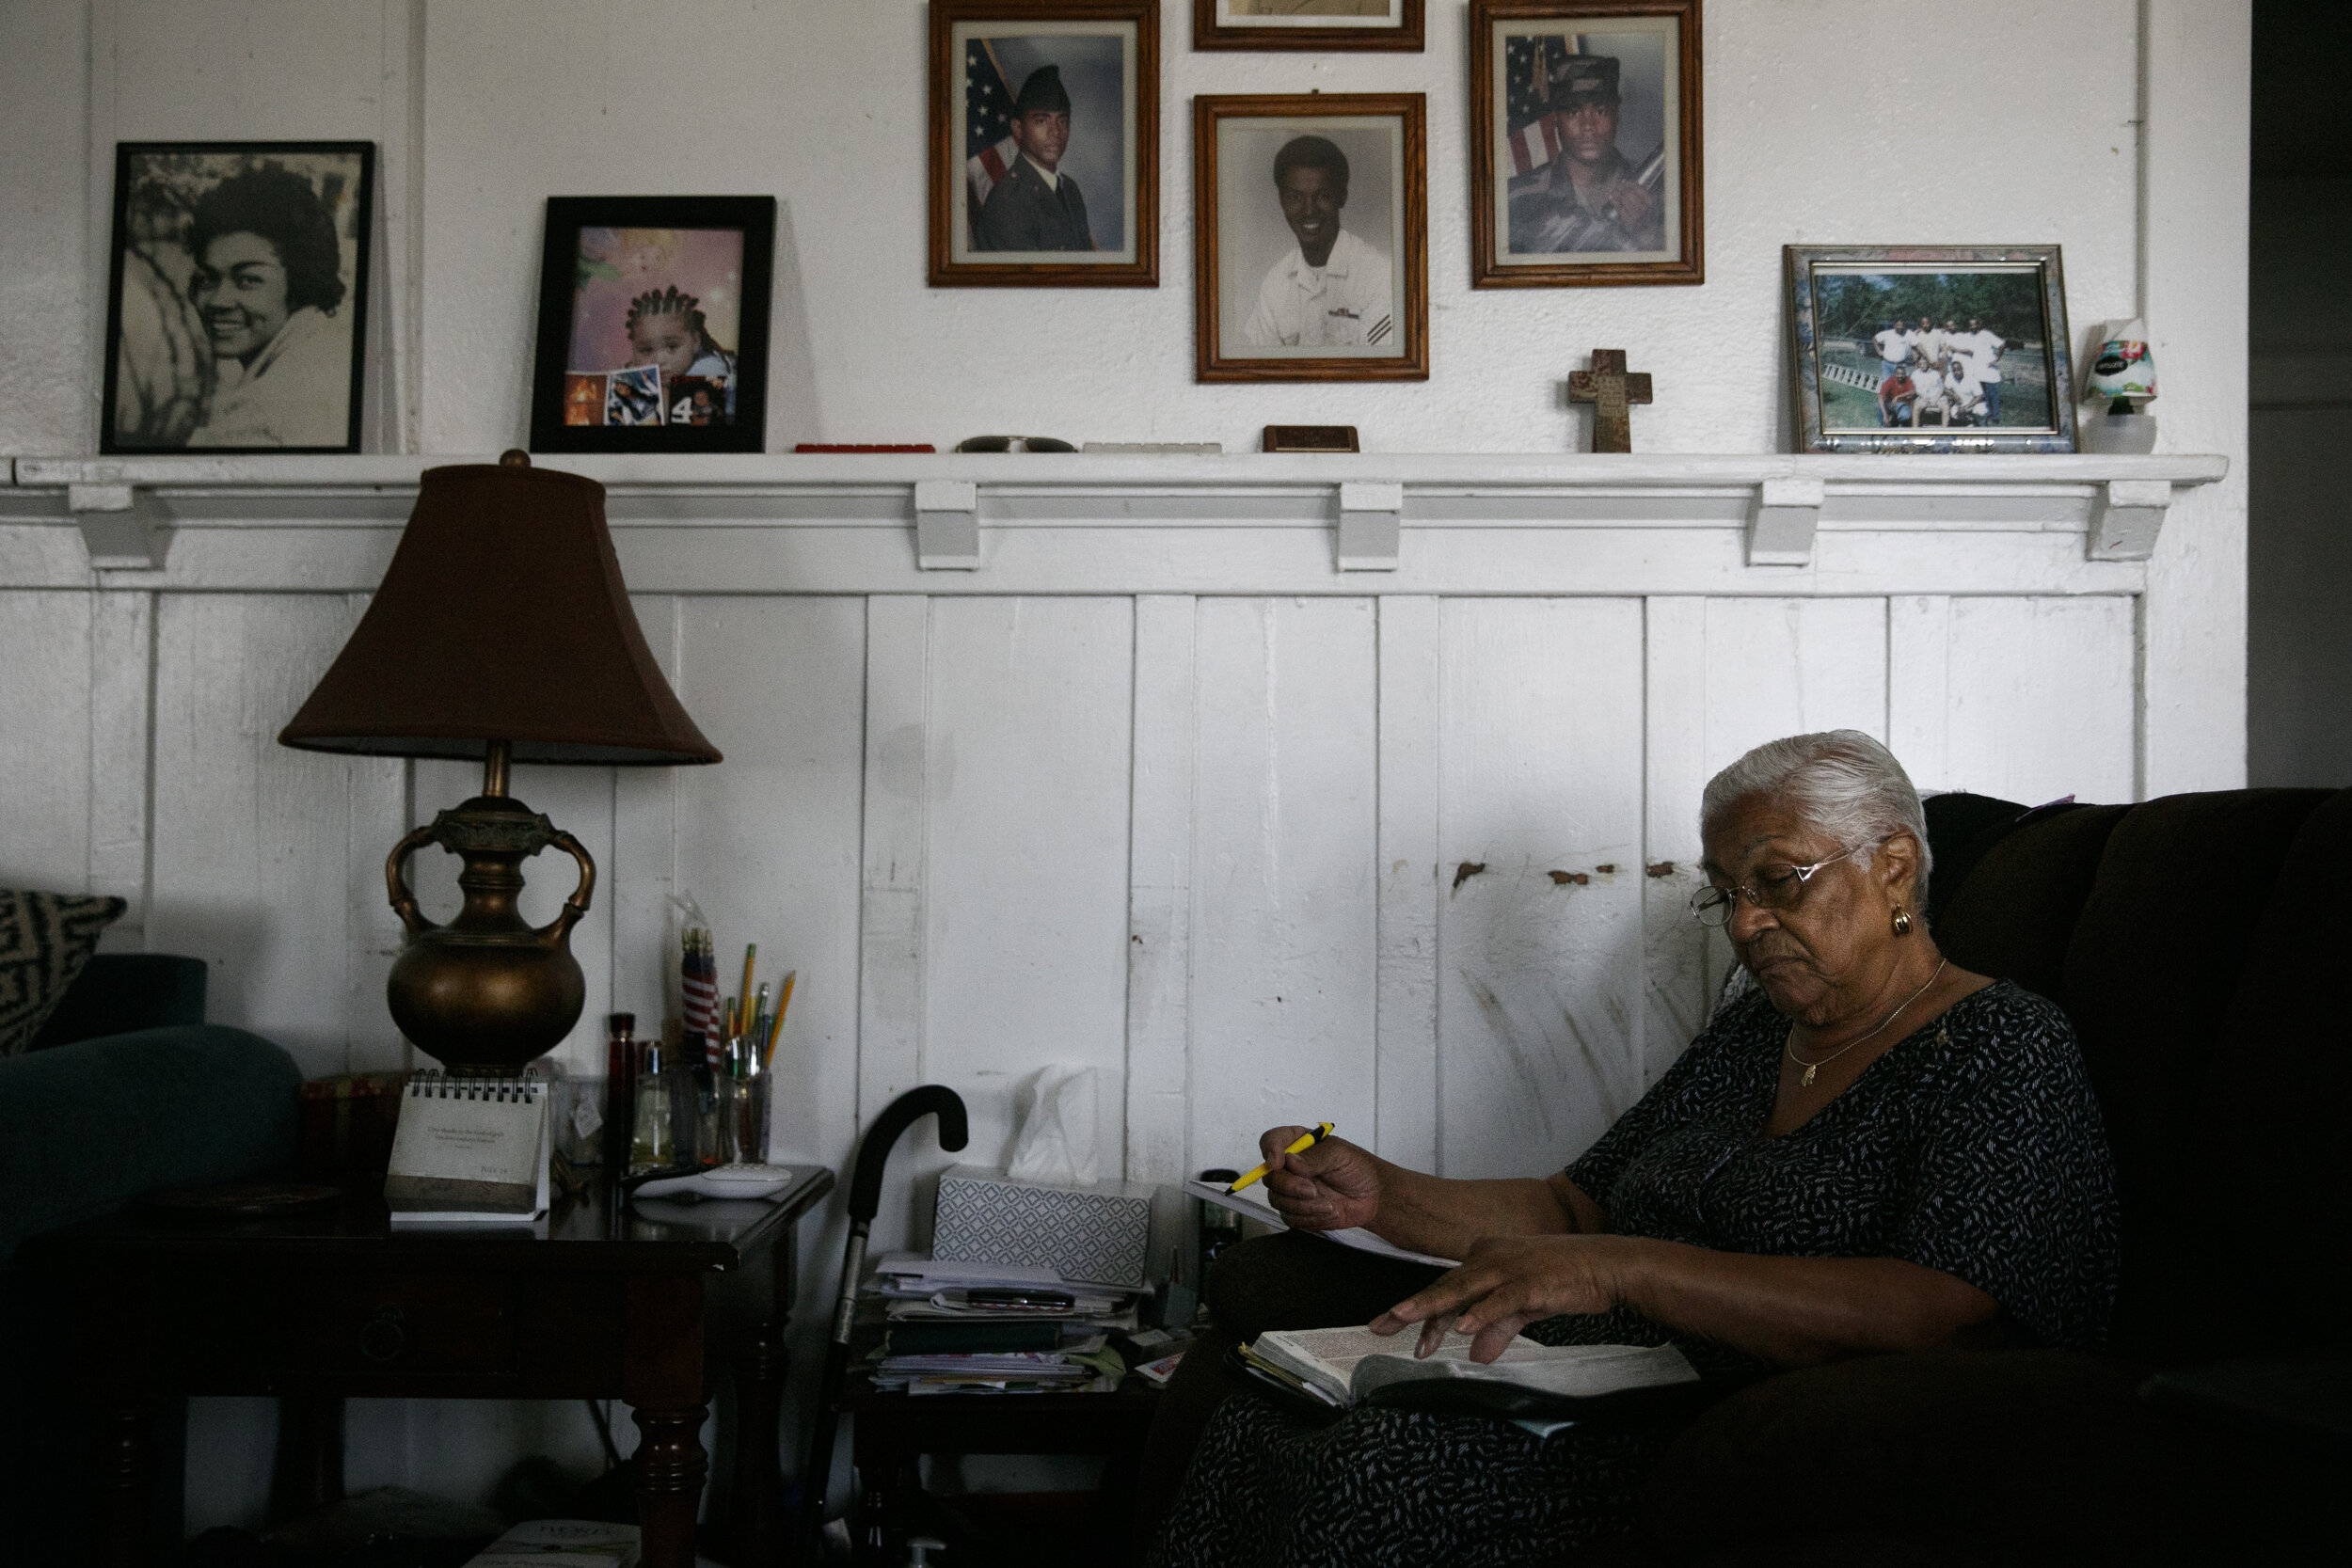  Lavarn Young, 81, reads her bible in the living room of her home as framed photos of herself, far left, and relatives adorn a wall Tuesday, July 14, 2020, in the Watts neighborhood of Los Angeles. Young, who moved to Watts from Texas in 1946, said s